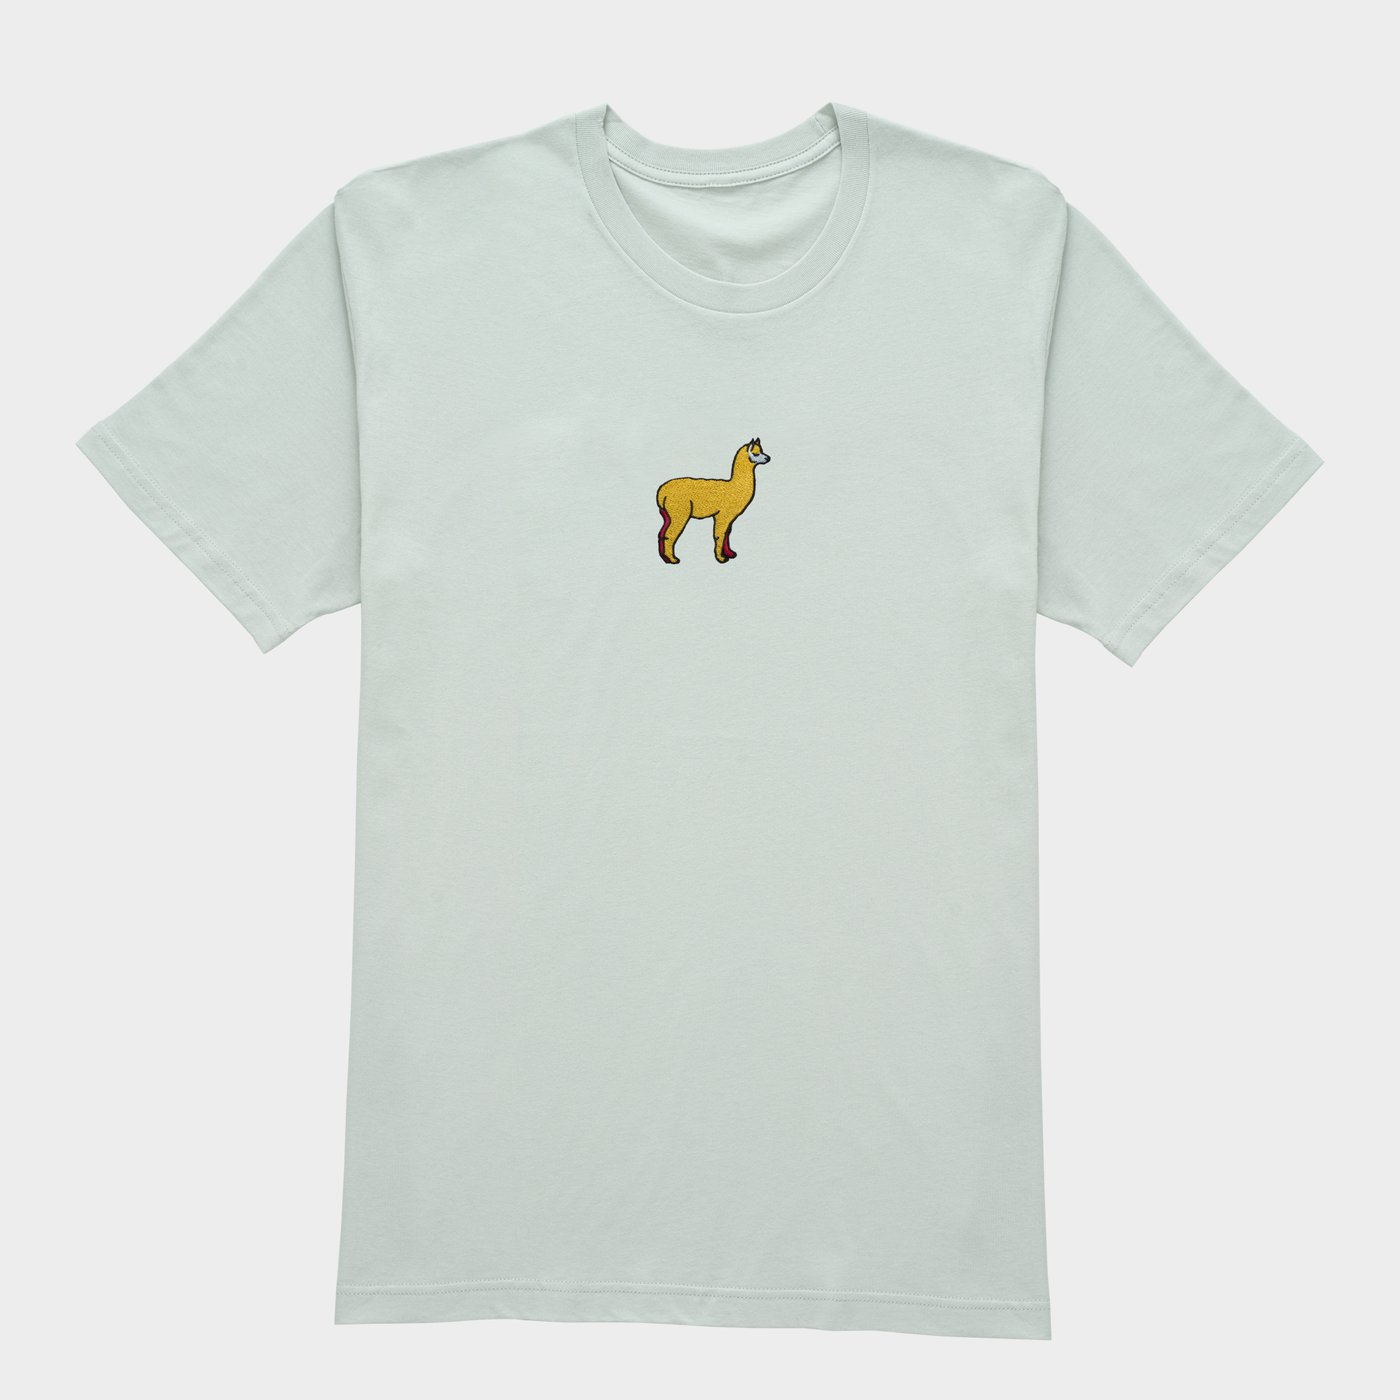 Bobby's Planet Women's Embroidered Alpaca T-Shirt from South American Amazon Animals Collection in Silver Color#color_silver